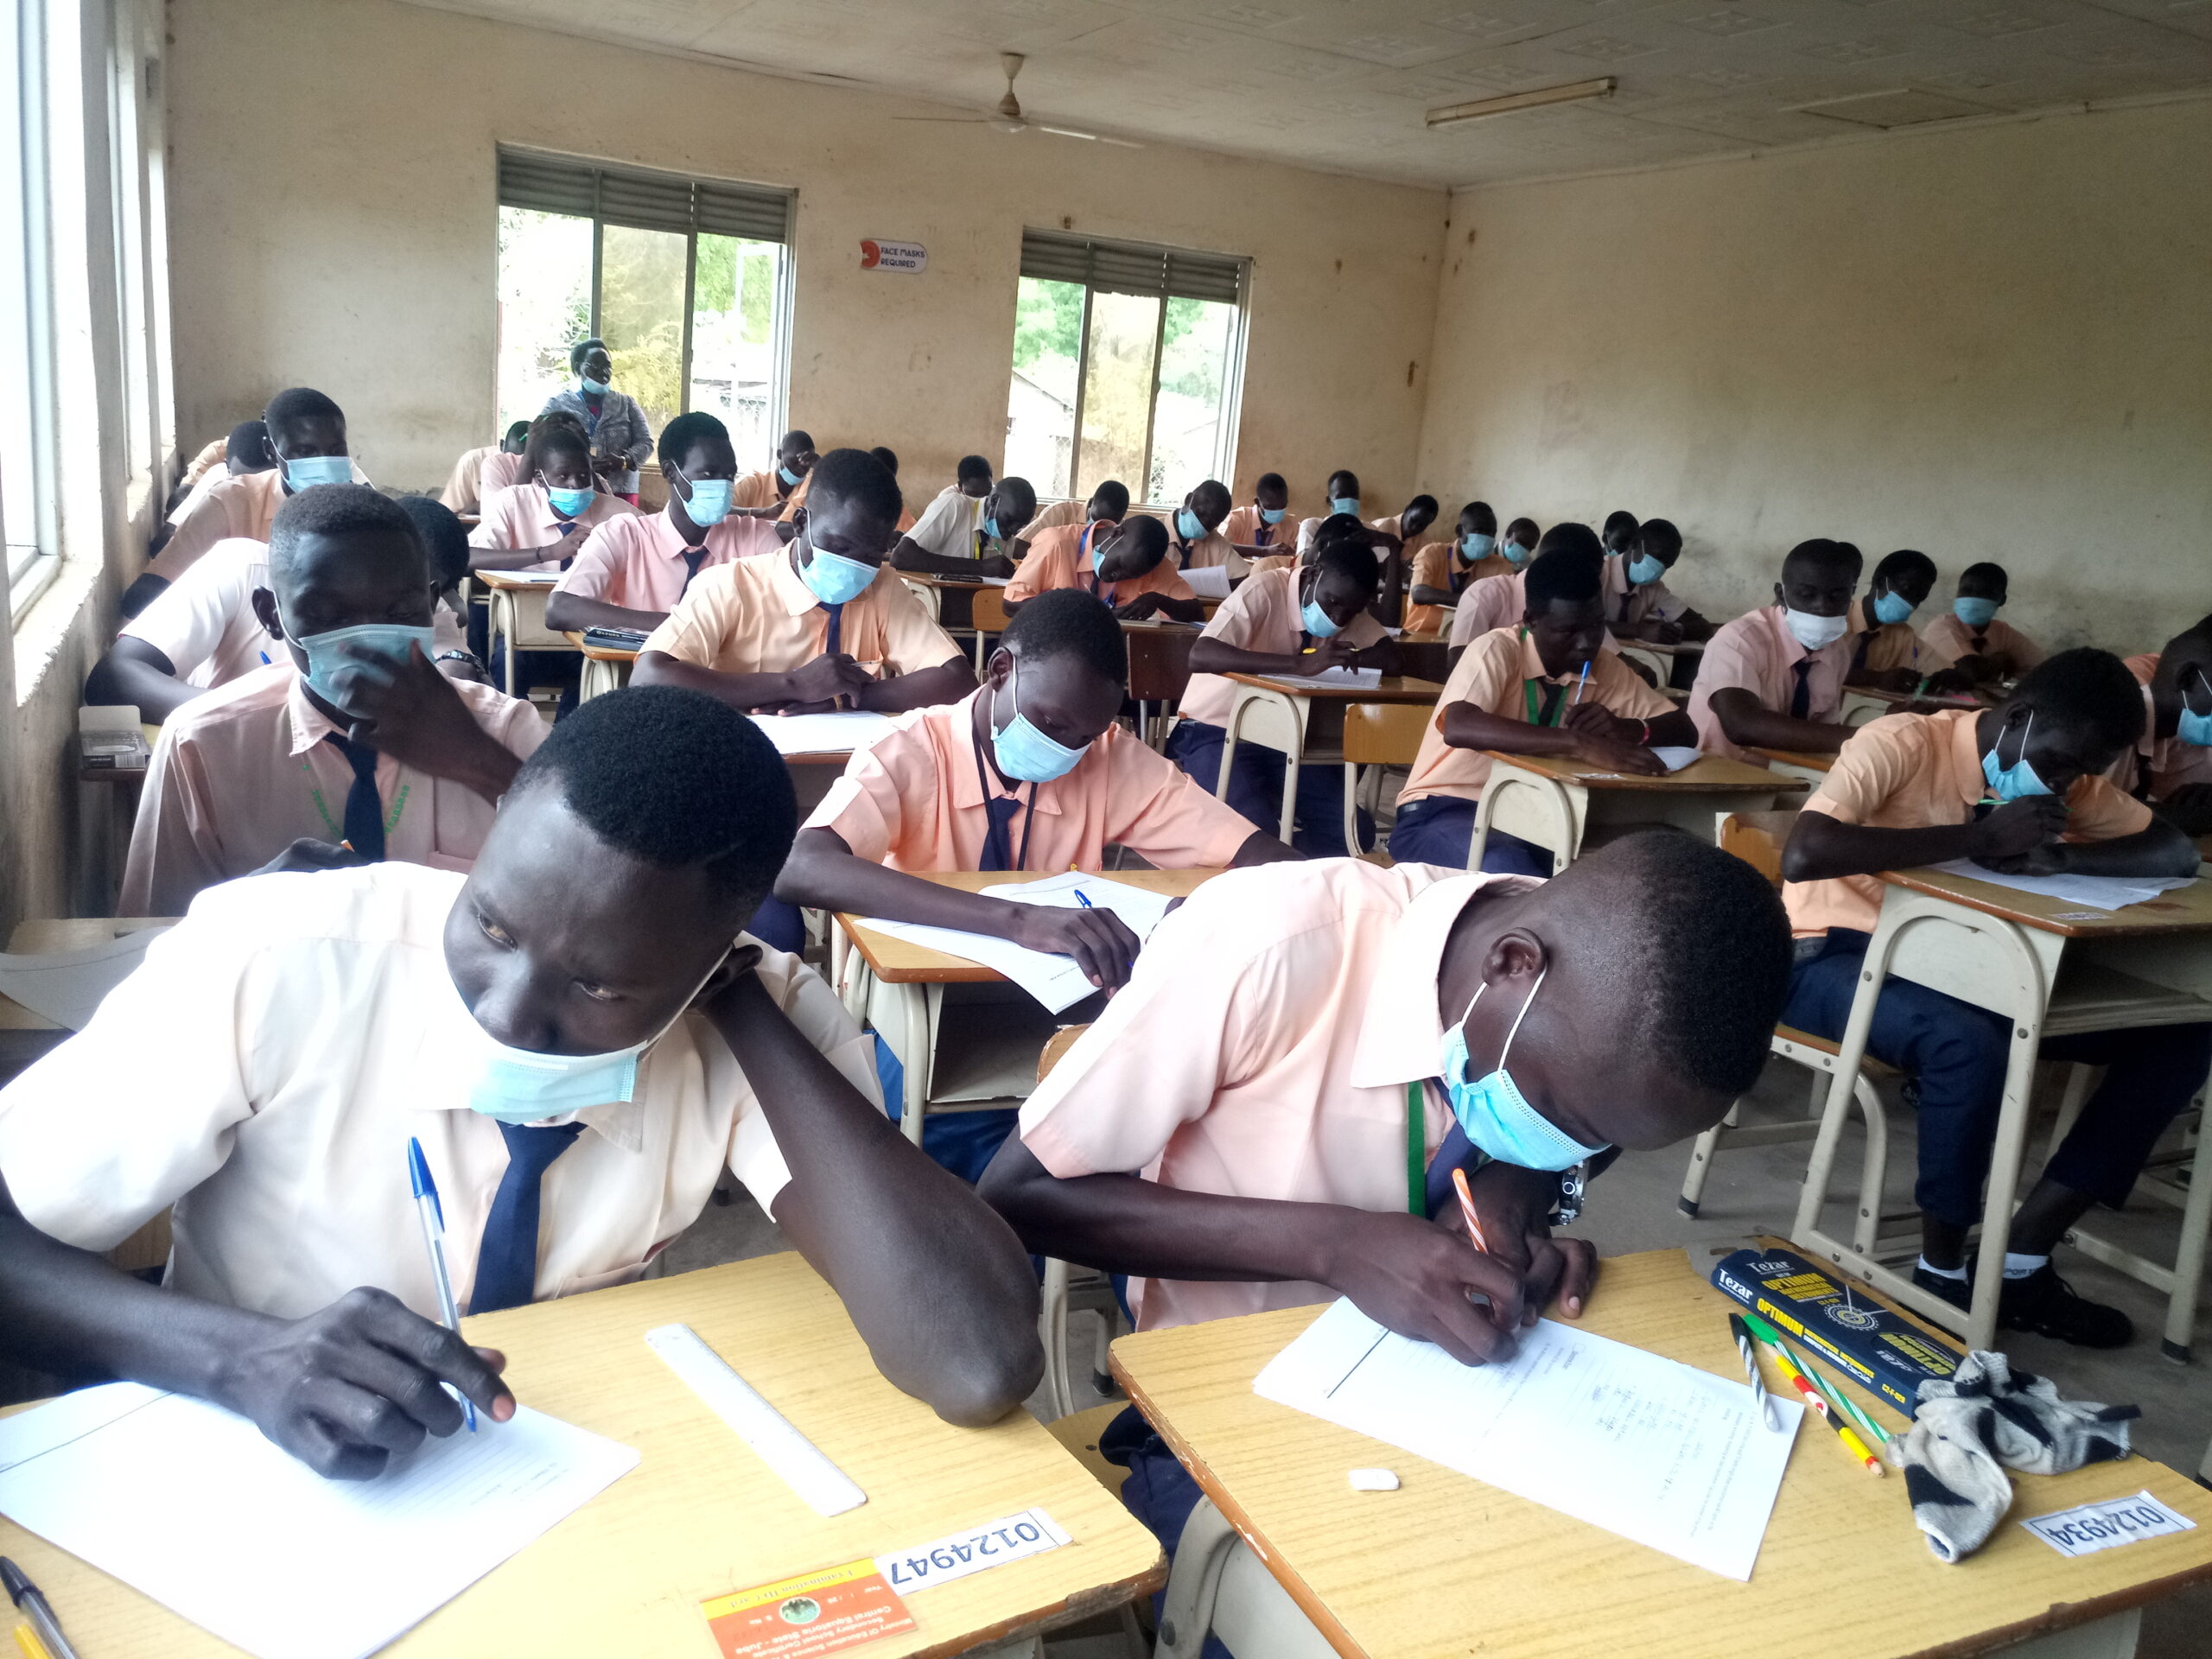 Student: They want over 5,000 SSP to check my exam results